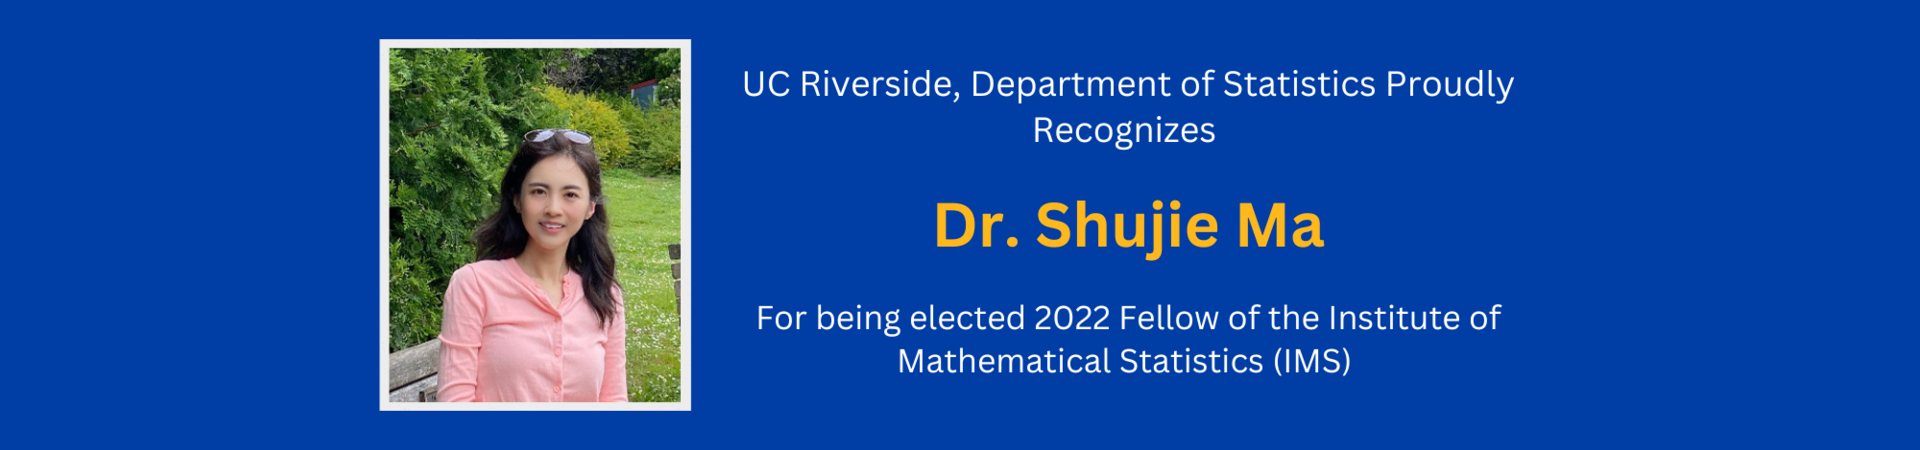 Dr. Shujie Ma for being elected 2022 Fellow of the IMS